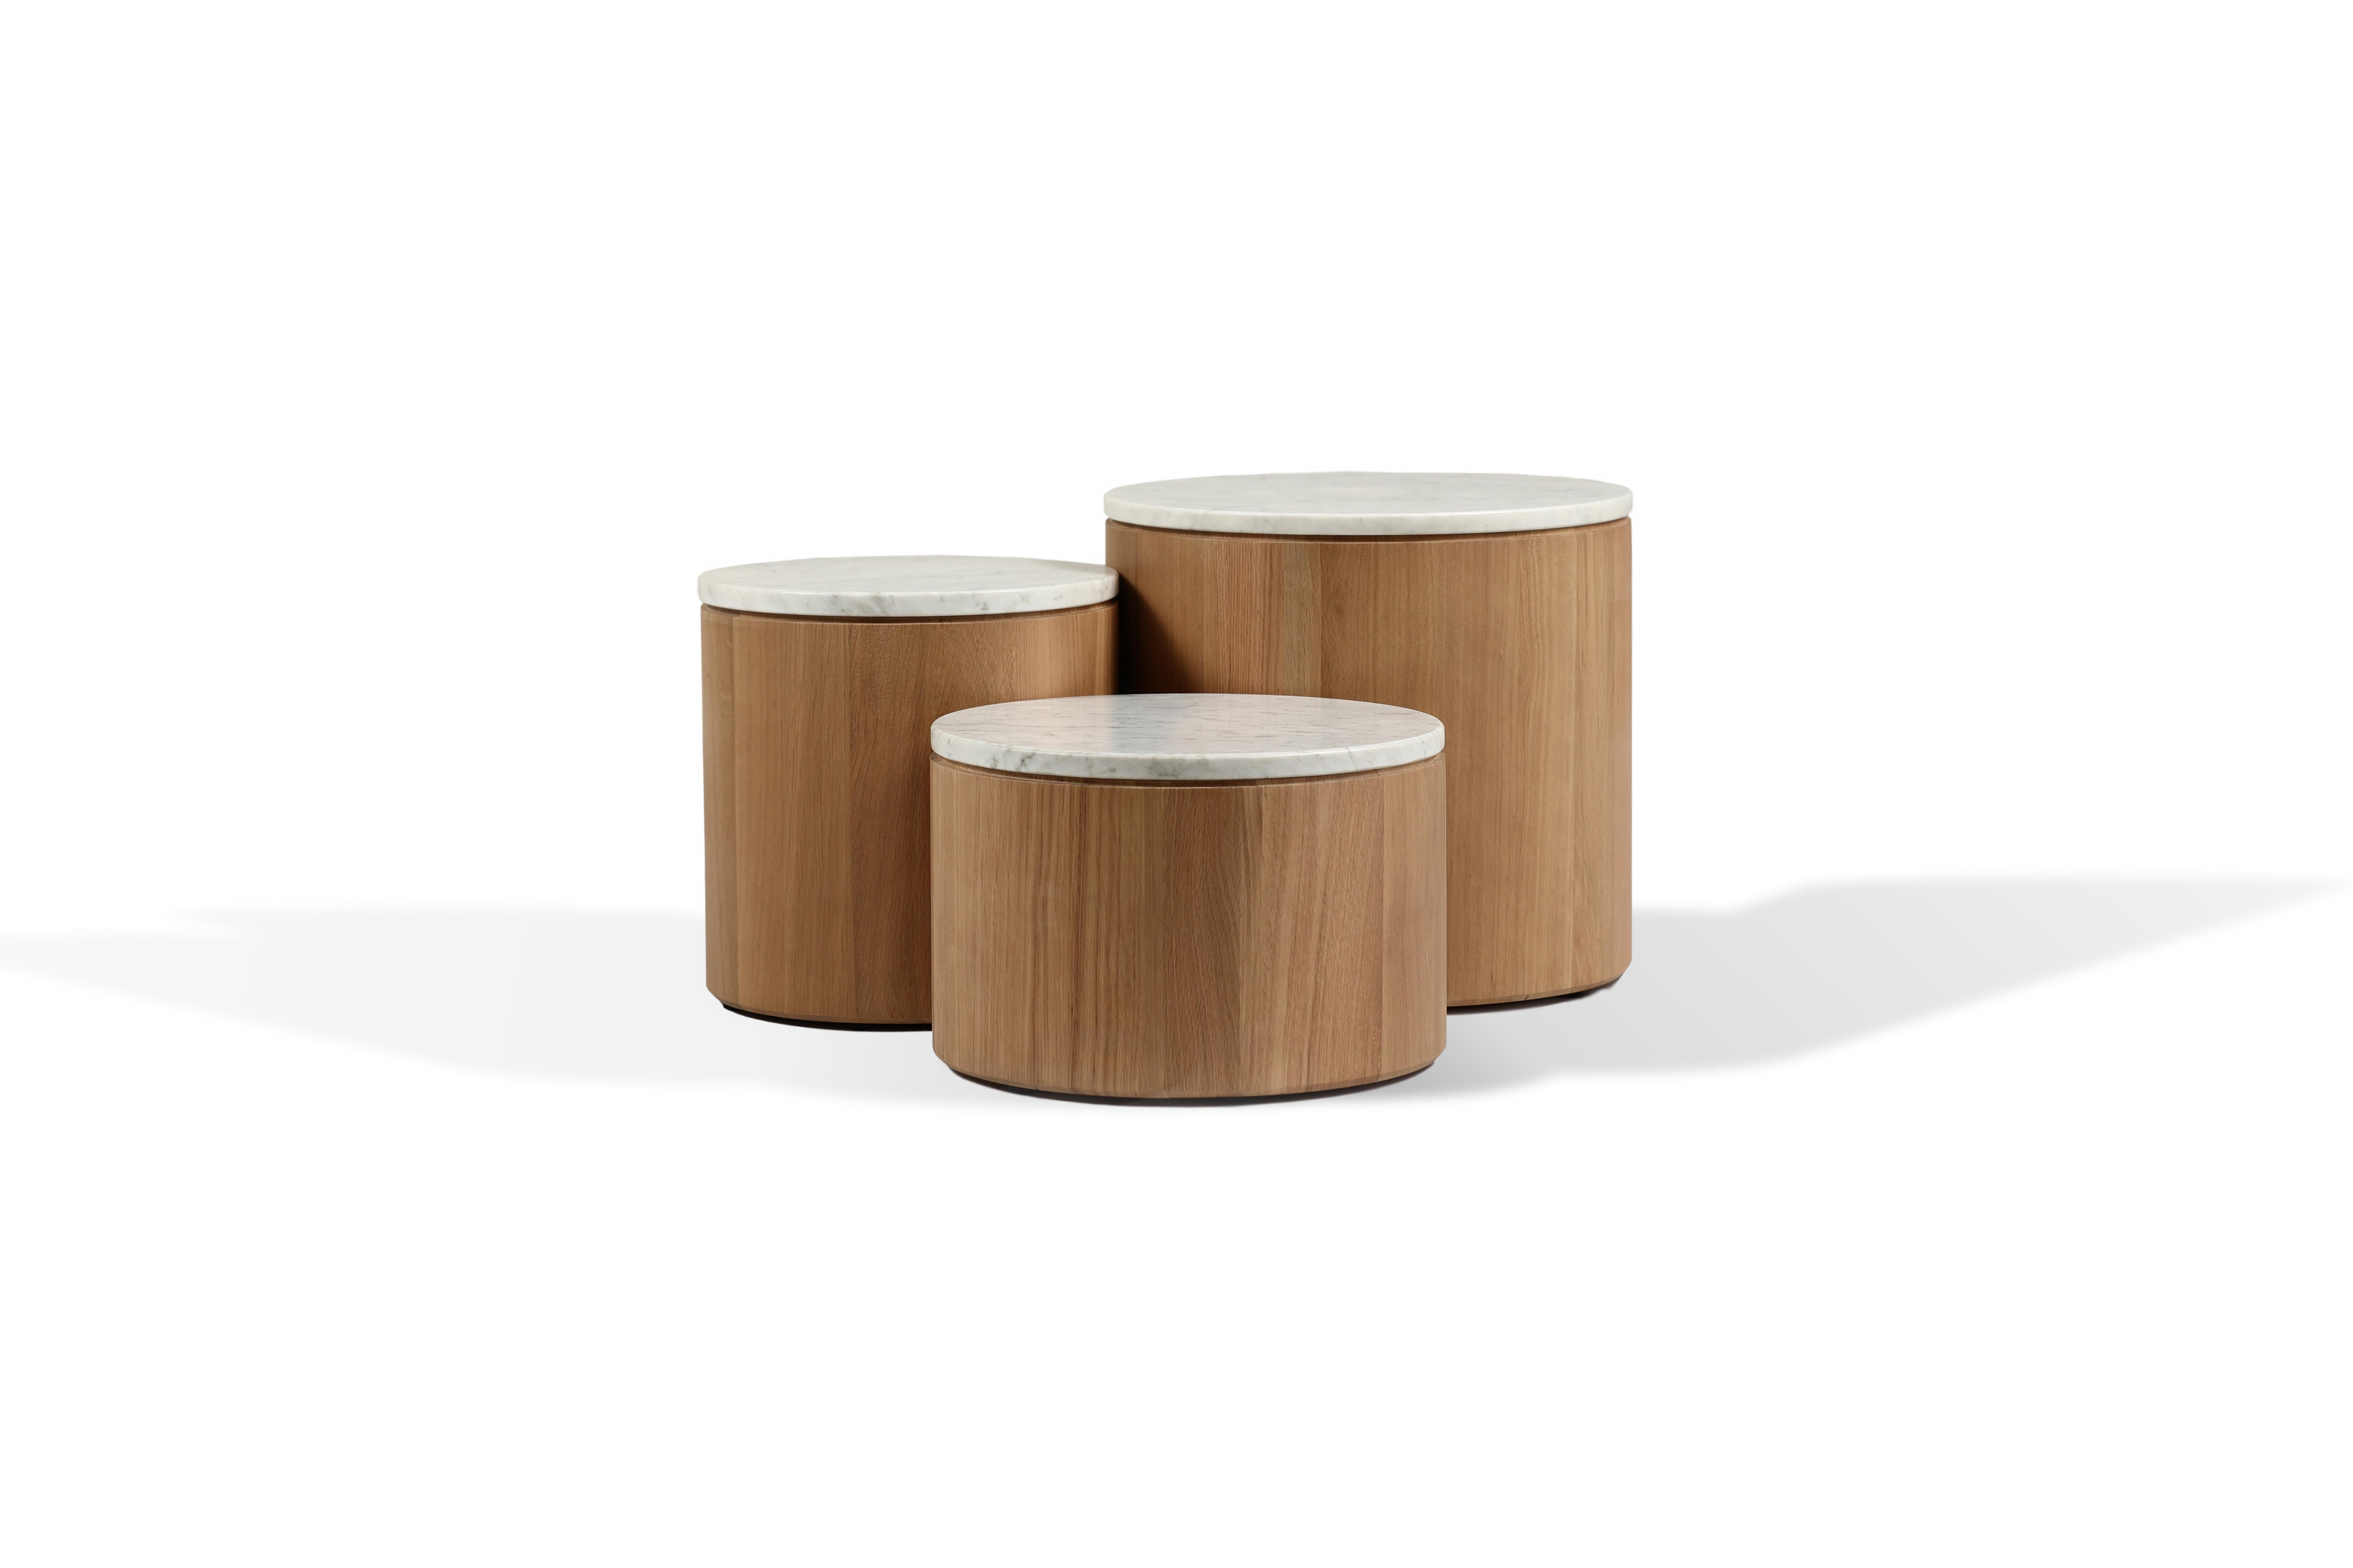 Dugtree is a concept consisting of 3 coffee tables of different sizes and heights. The geometry of the products keeps the same roundness of the legs specific to The Oak Saga collection. 
 
The top consists of a marble circle carefully placed on